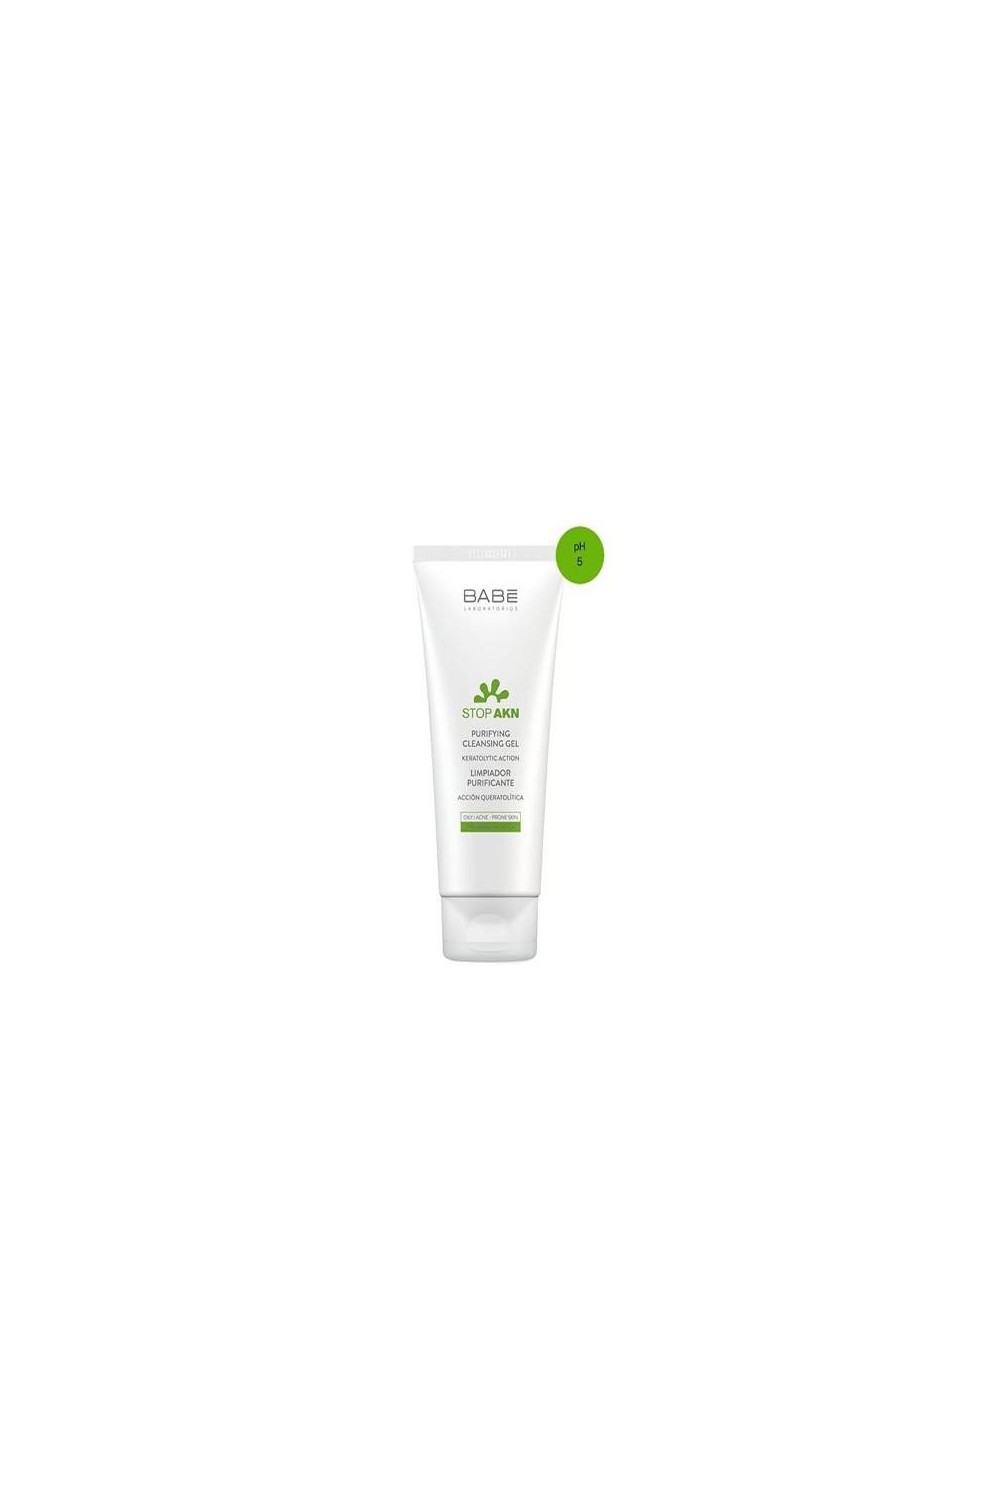 Babe Babé Stop Akn Purifying Cleansing Gel 200ml